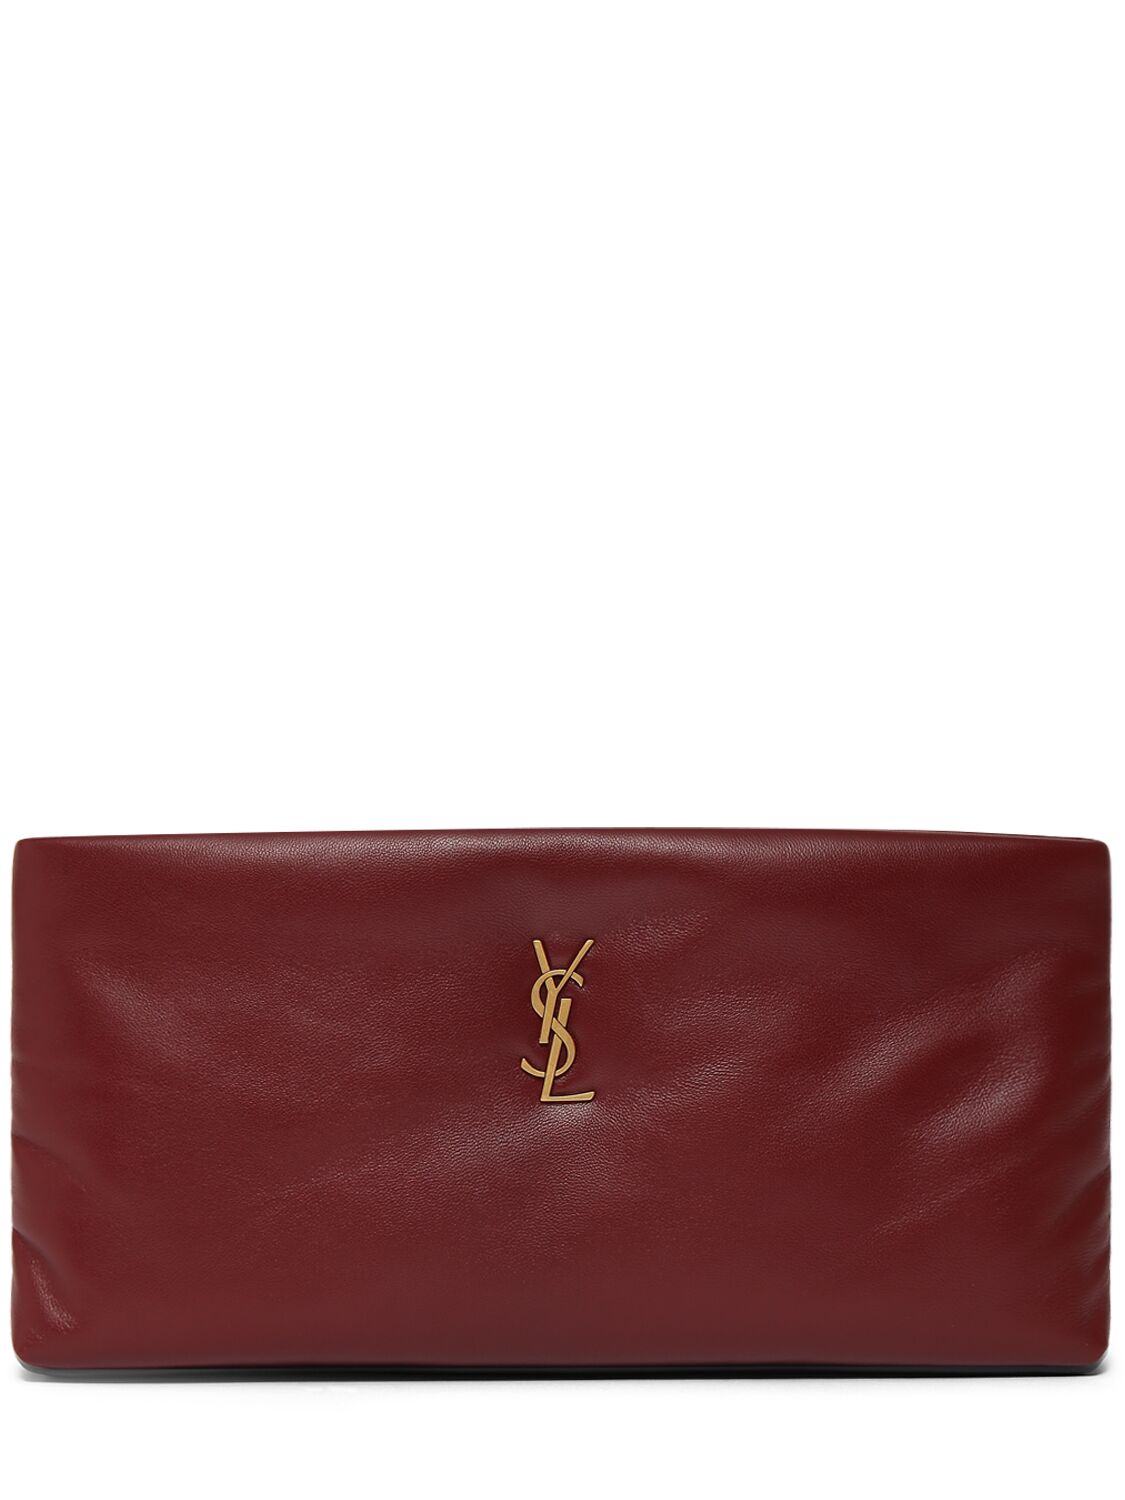 Saint Laurent Calypso Leather Long Zipped Pouch In Red